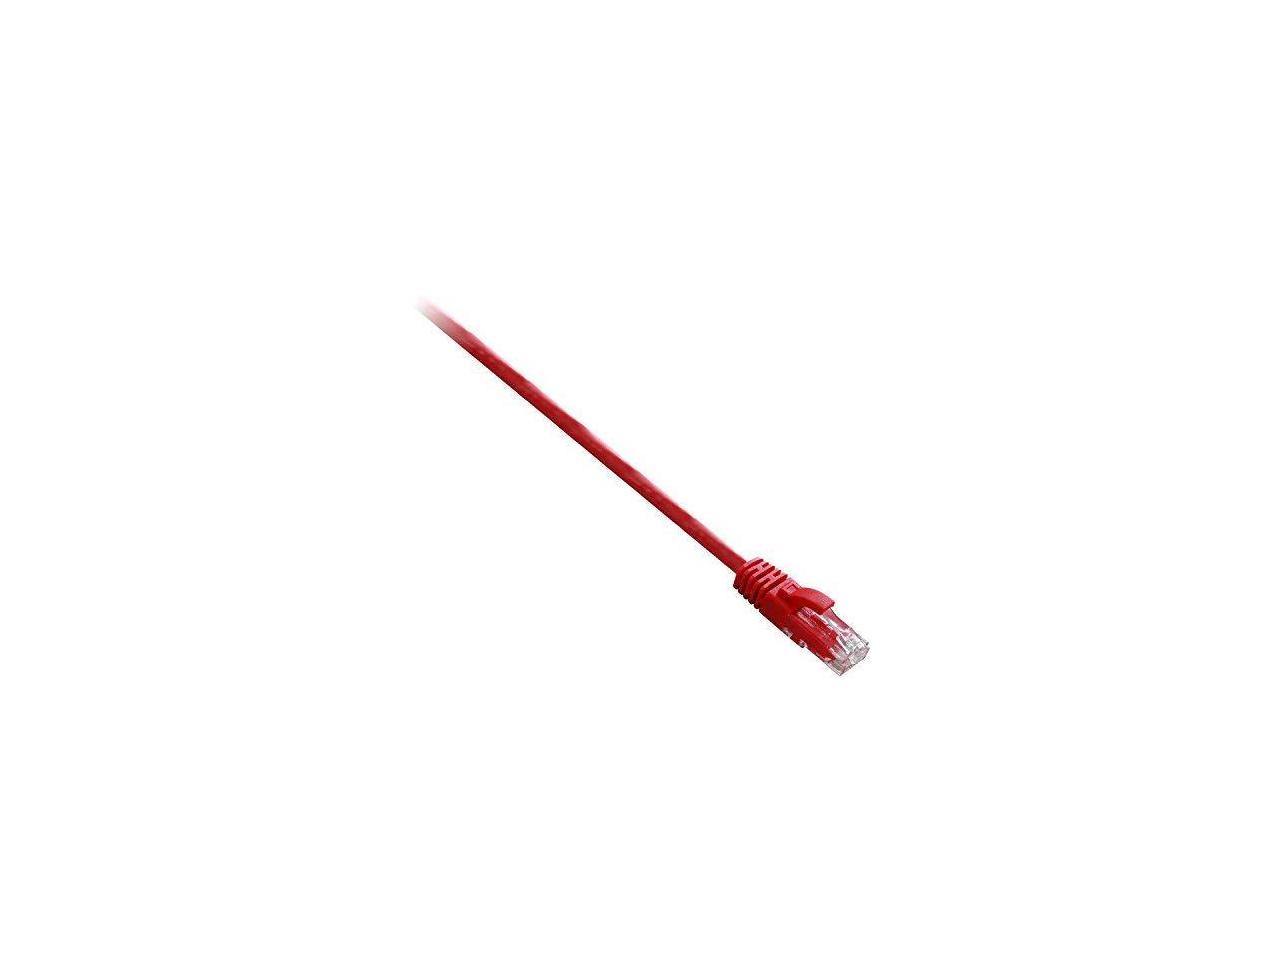 V7 Red Cat5e Unshielded (Utp) Cable Rj45 Male To Rj45 Male 3M 10Ft